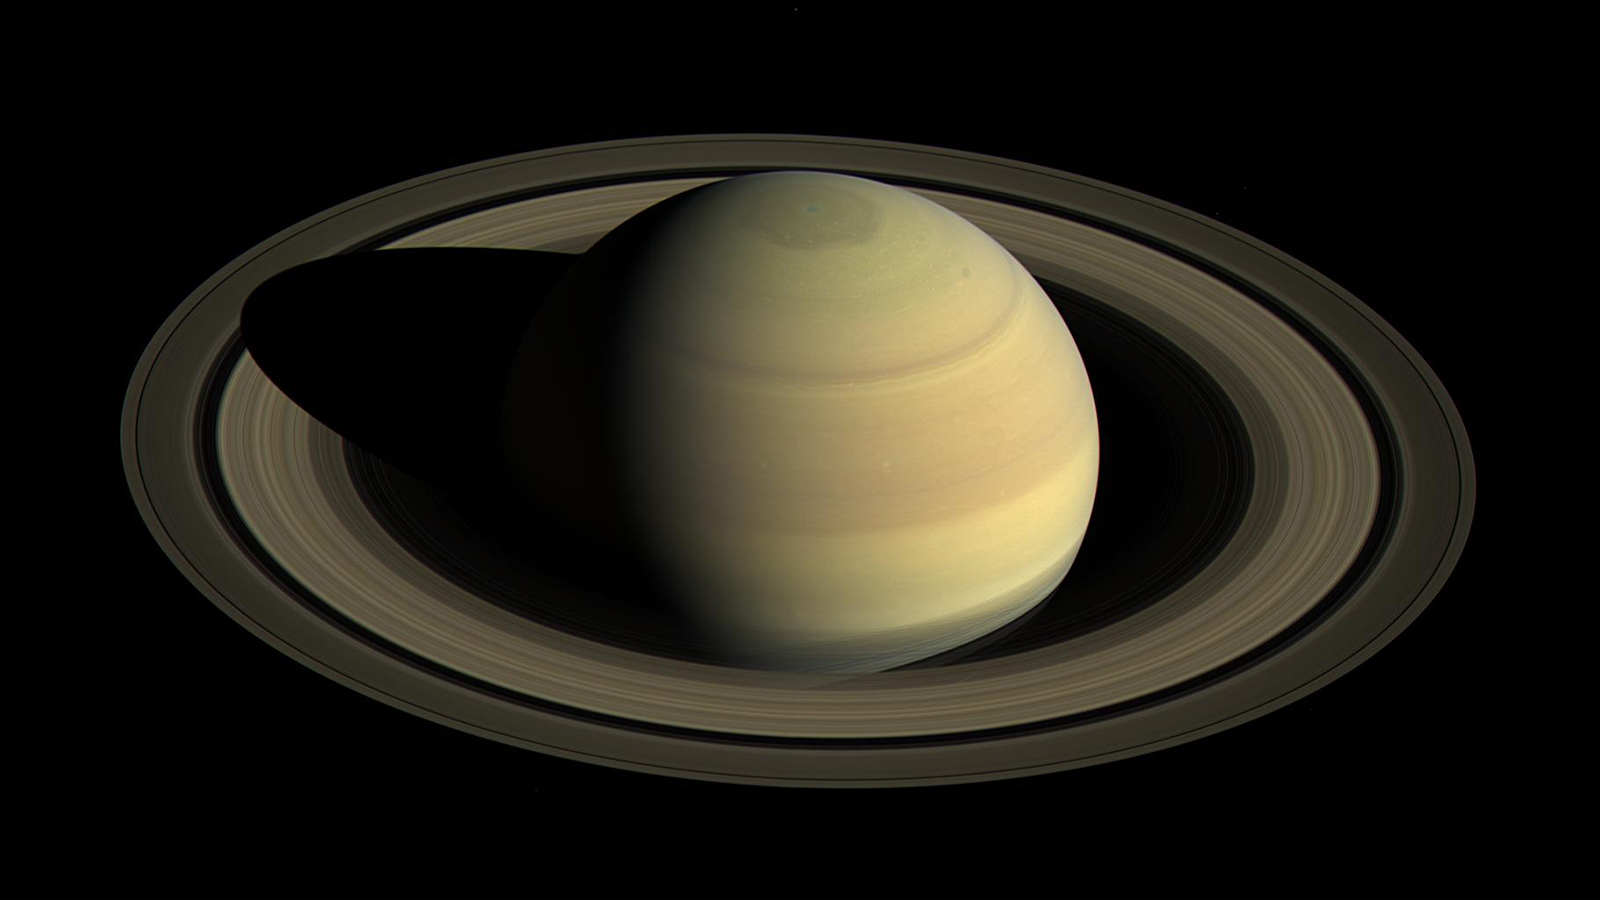 10 Things You Probably Don't Know About Saturn